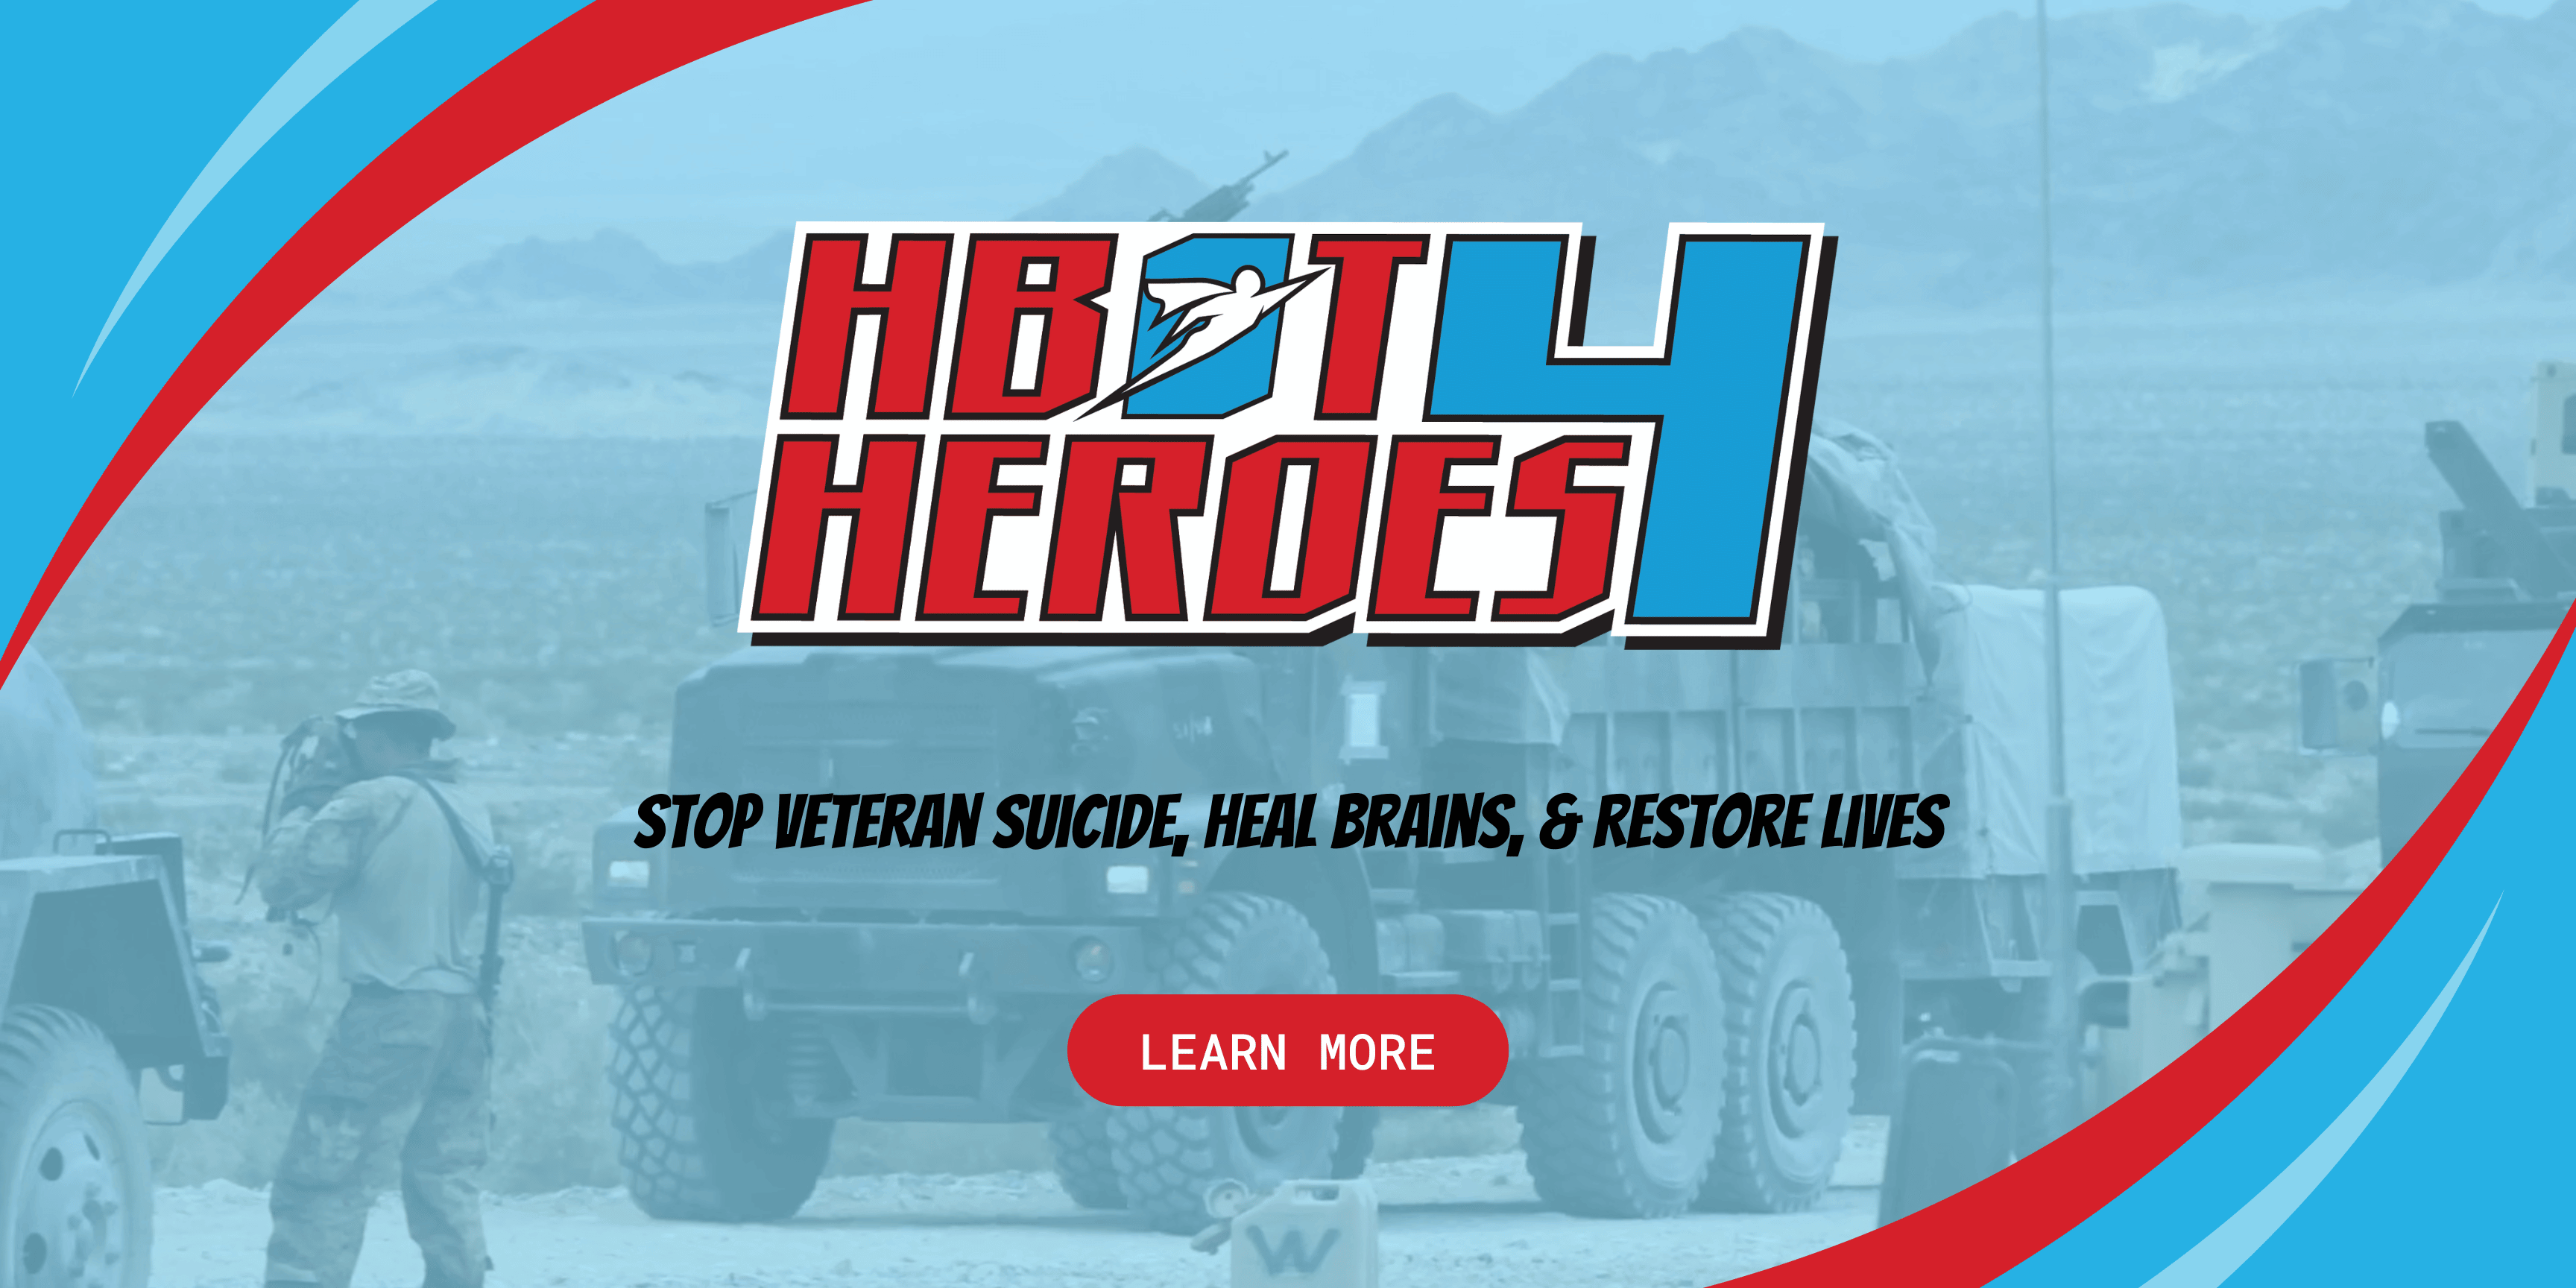 HBOT4Heroes- Hyperbaric Oxygen Therapy Clinic for Veterans Located in Durham, NC